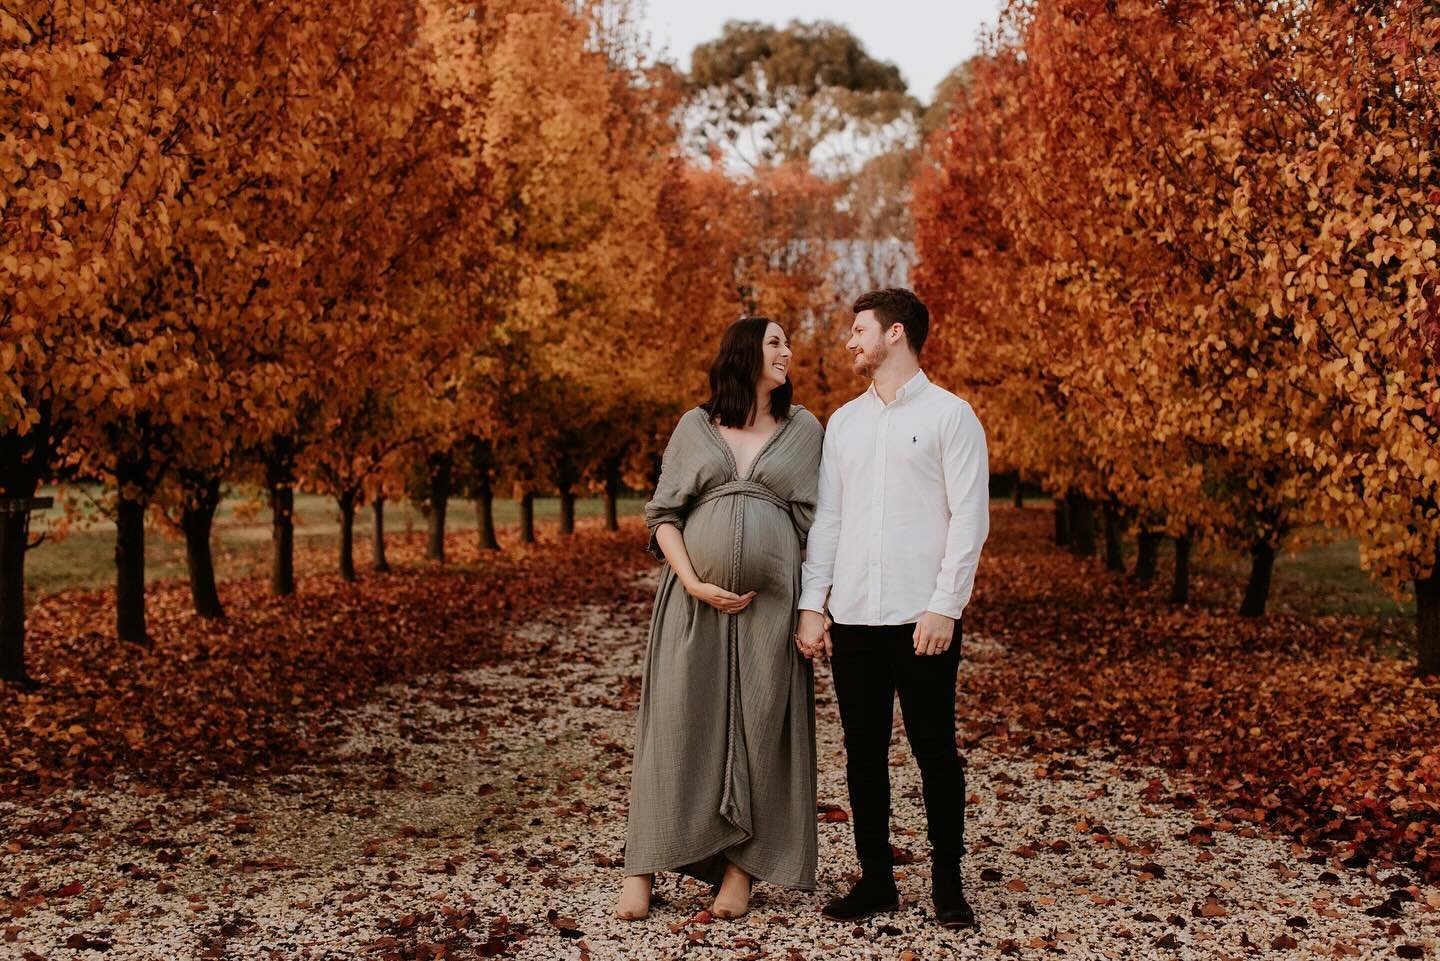 Throw back to this epic Autumn backdrop when the Guy&rsquo;s were expecting their twins! Cannot wait to see the little cherubs again this weekend and see how much they&rsquo;ve grown &hearts;️&hearts;️ @kateqemalguy @thatdamenguy